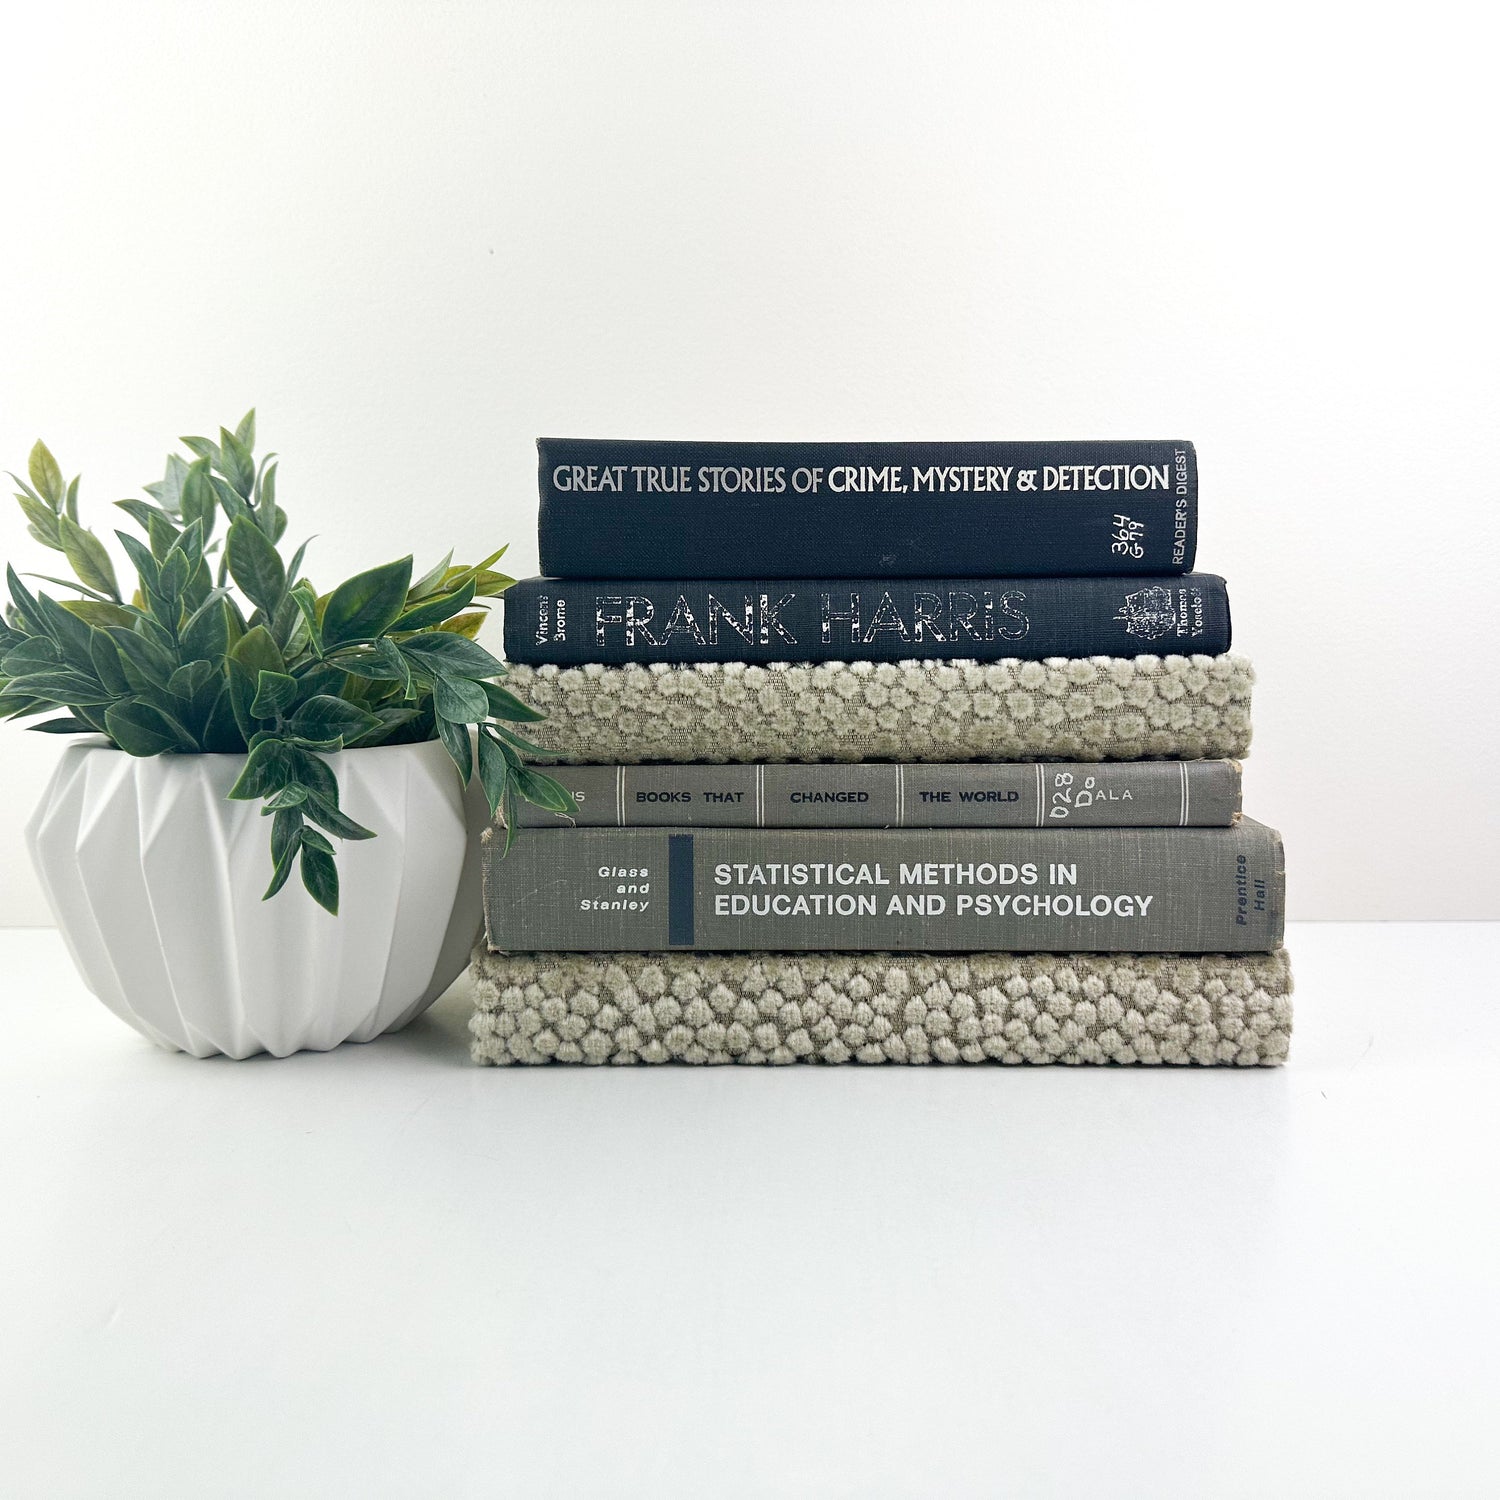 Book Decor, Neutral Home Decor, Textured Home Accents, Black and Tan